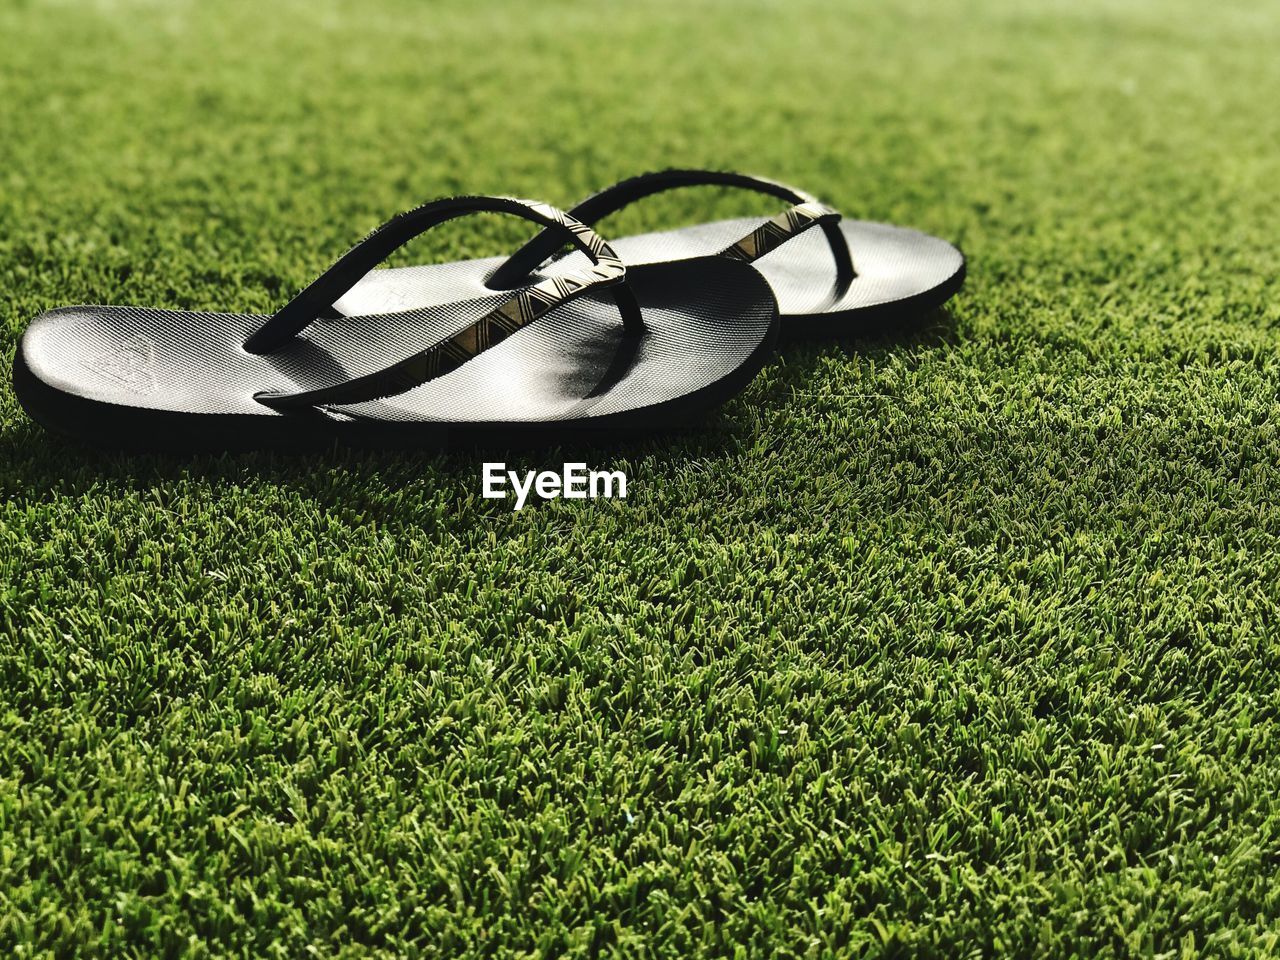 HIGH ANGLE VIEW OF SUNGLASSES AND GRASS